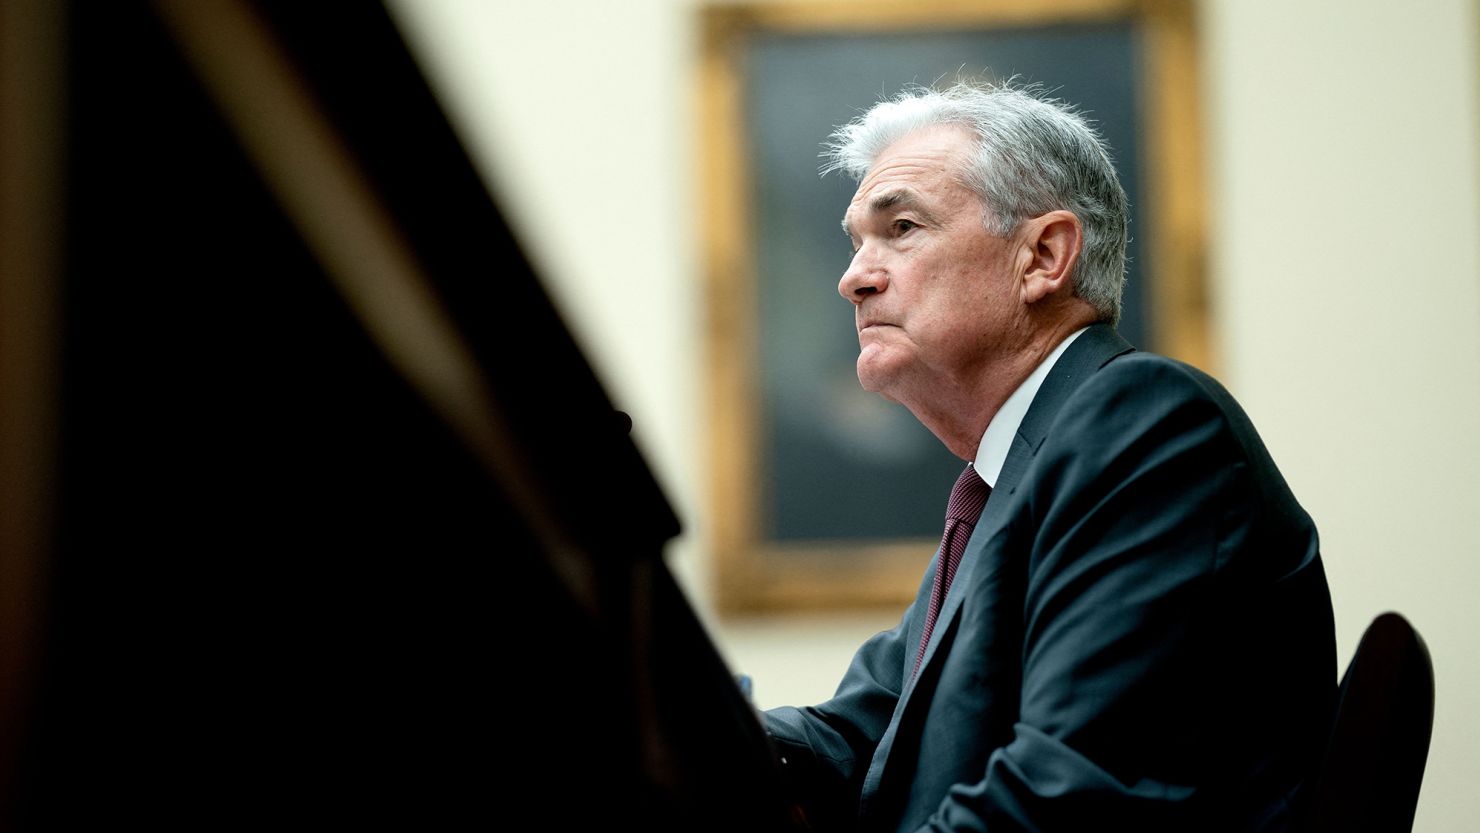 Federal Reserve Board Chairman Jerome Powell testifies before a House Financial Services Committee hearing on the Federal Reserve's Semi-Annual Monetary Policy Report, on Capitol Hill in Washington, DC, on June 21, 2023.